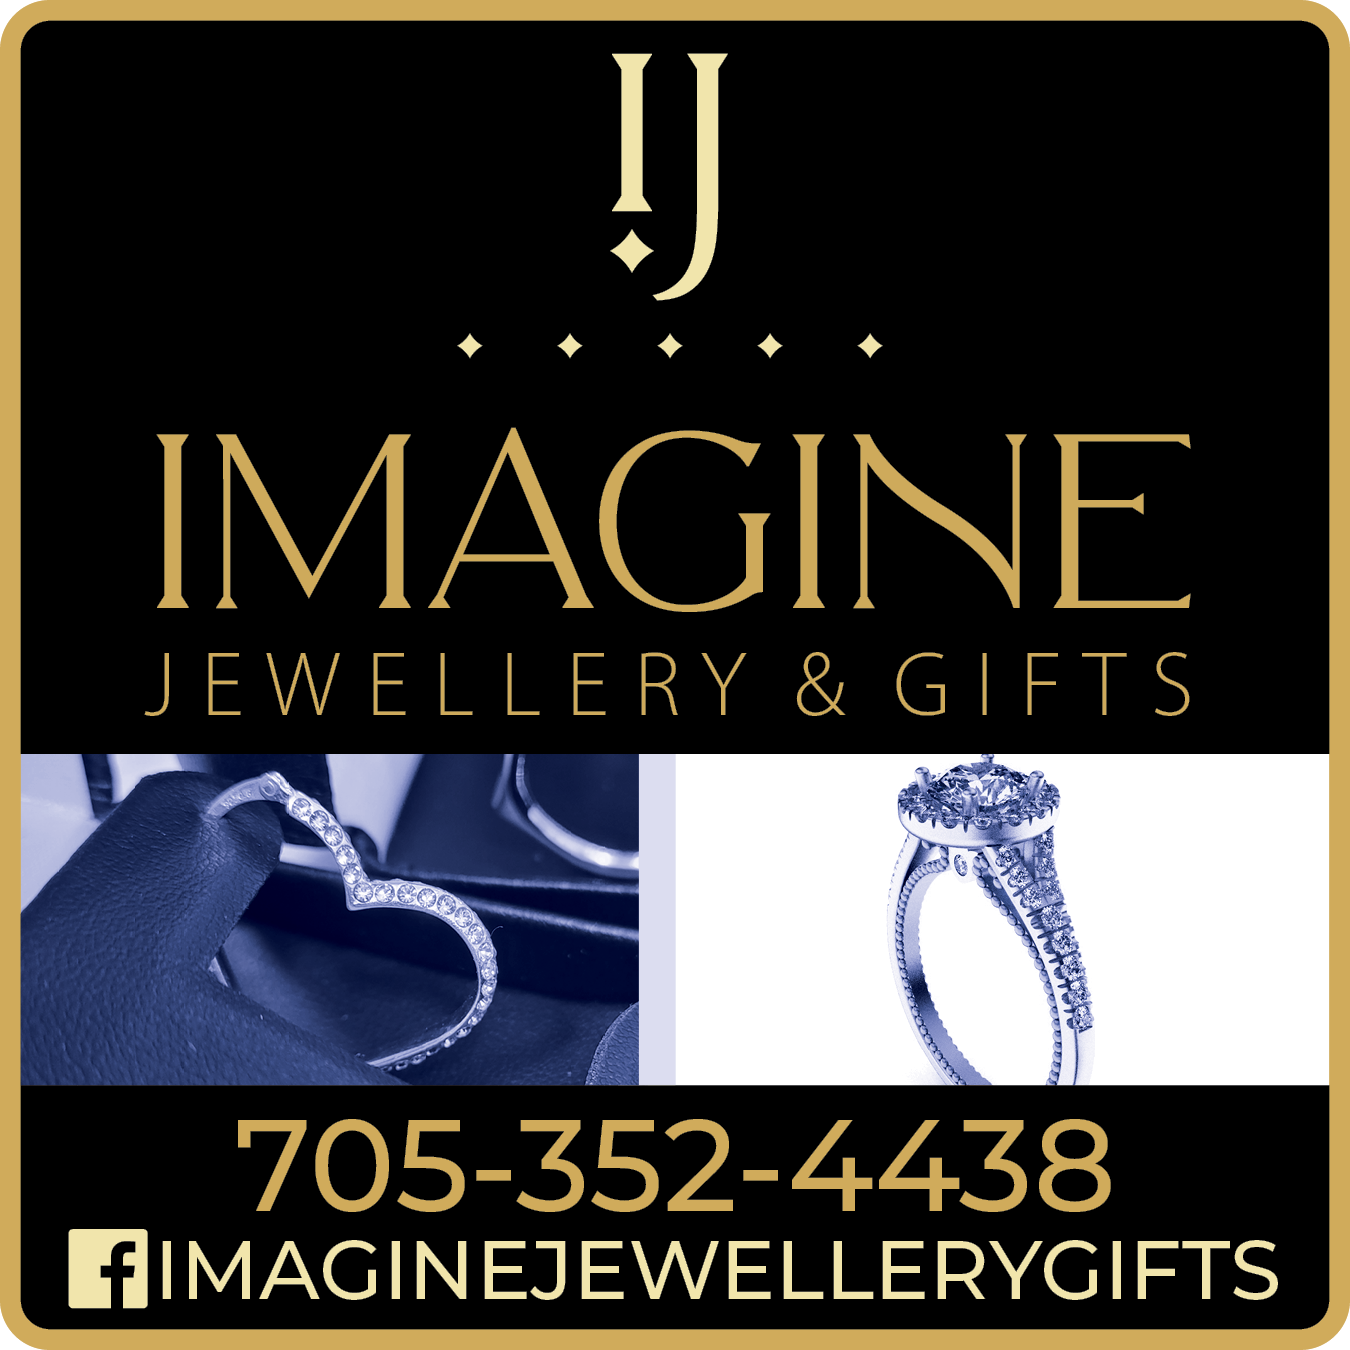 Imagine Jewellery and gifts